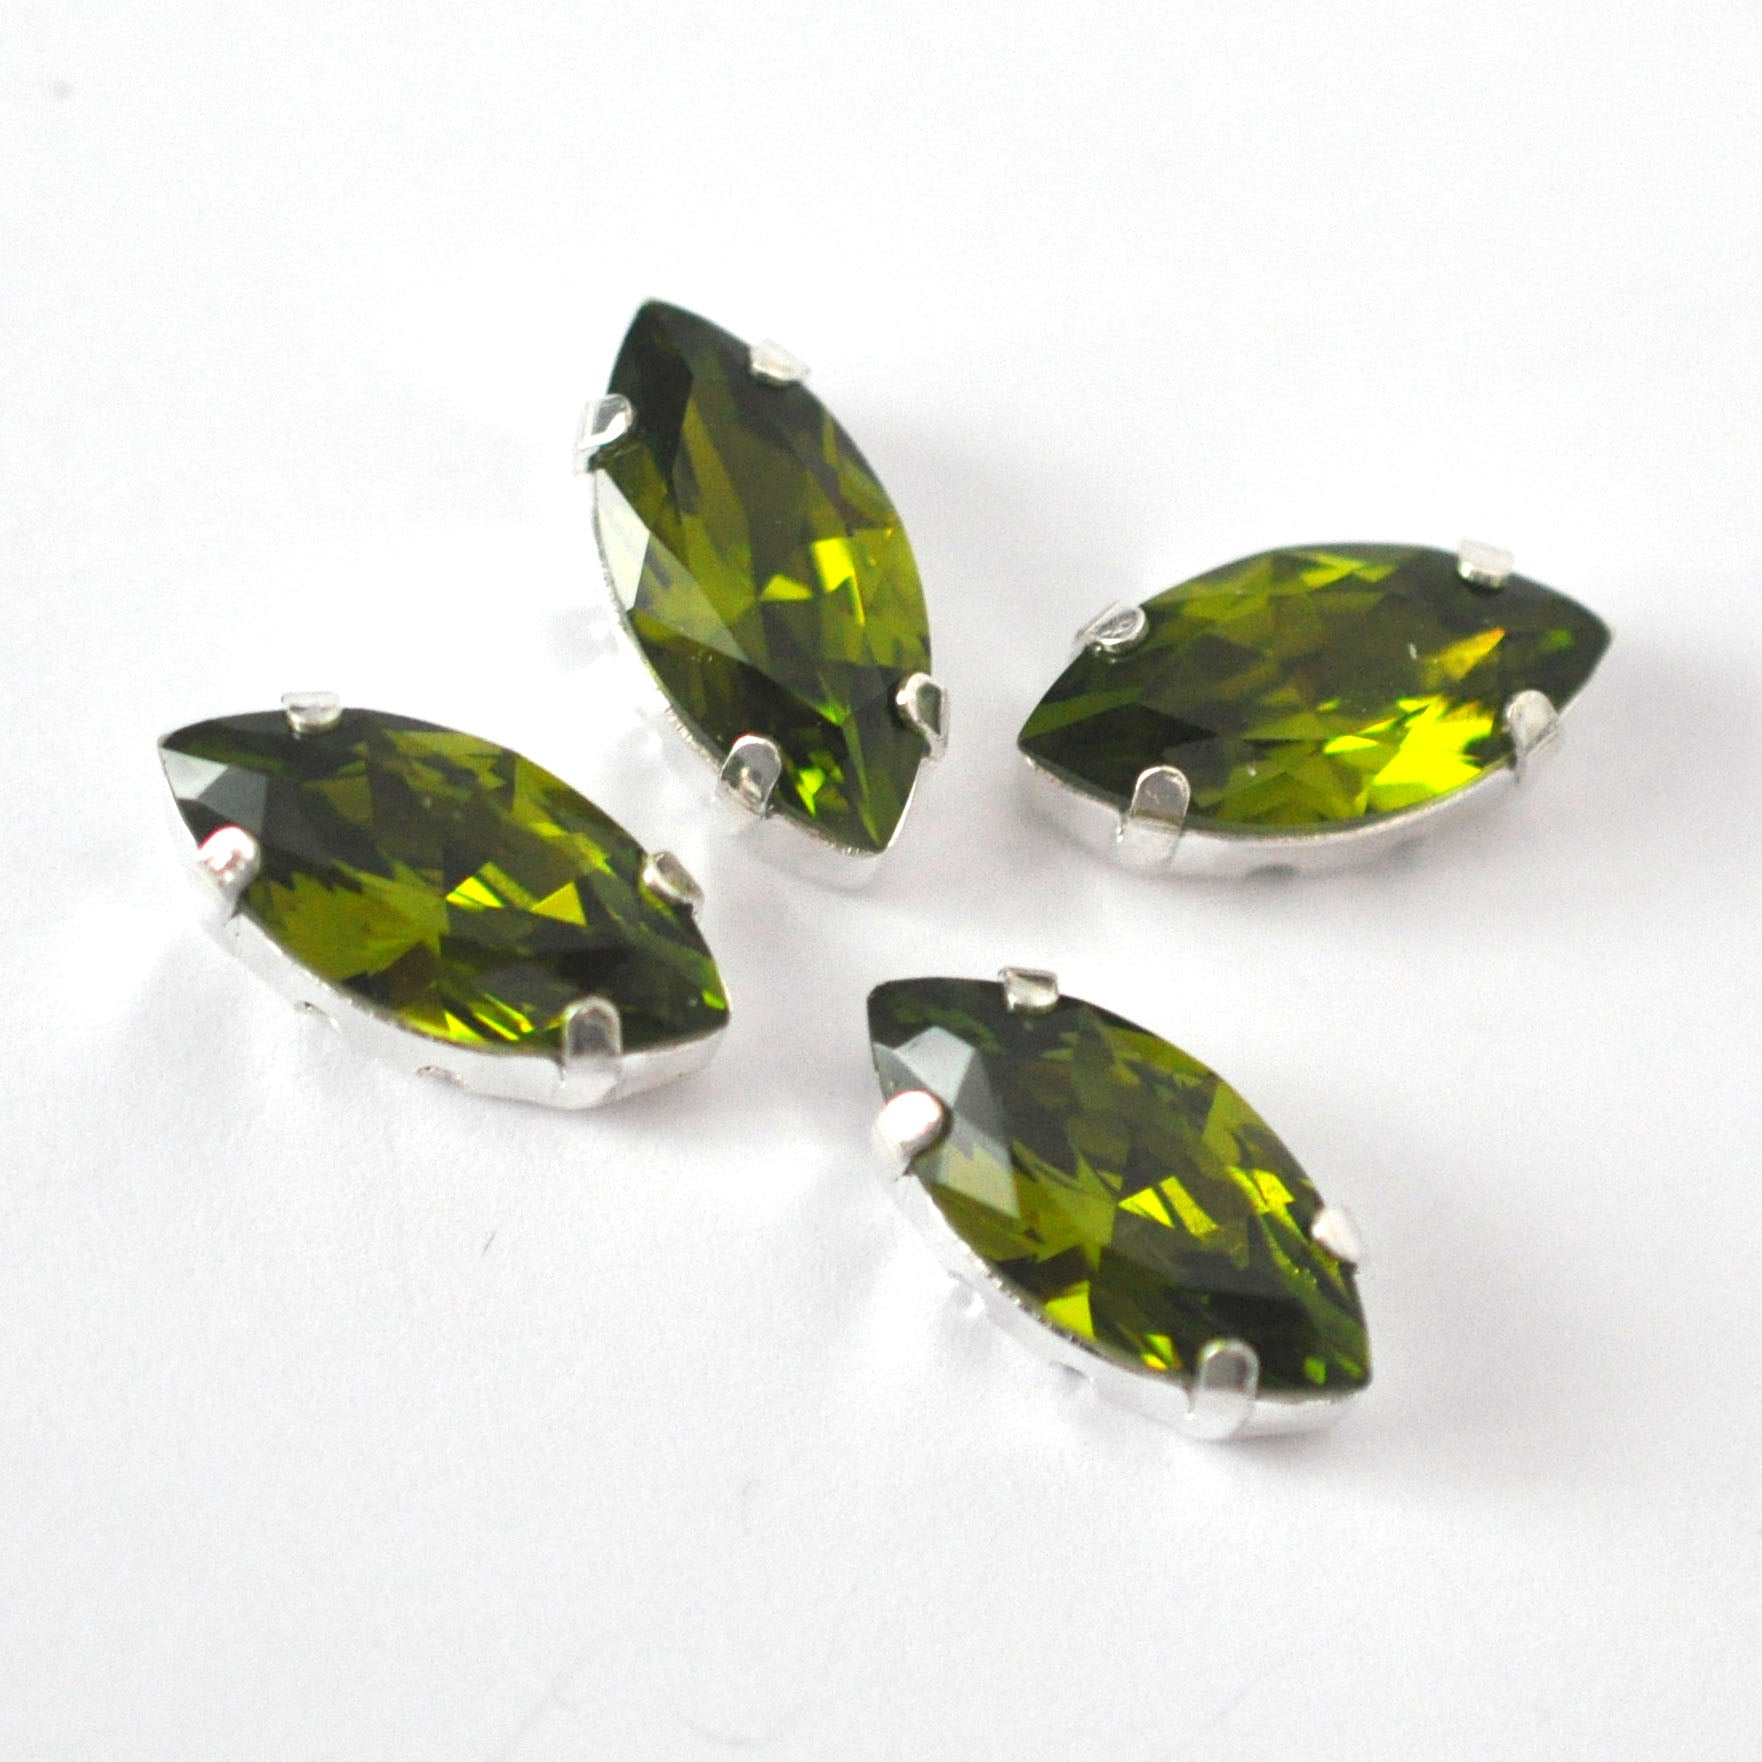 Olivine 15x7mm Navette Sew On Crystals - 4 Pieces